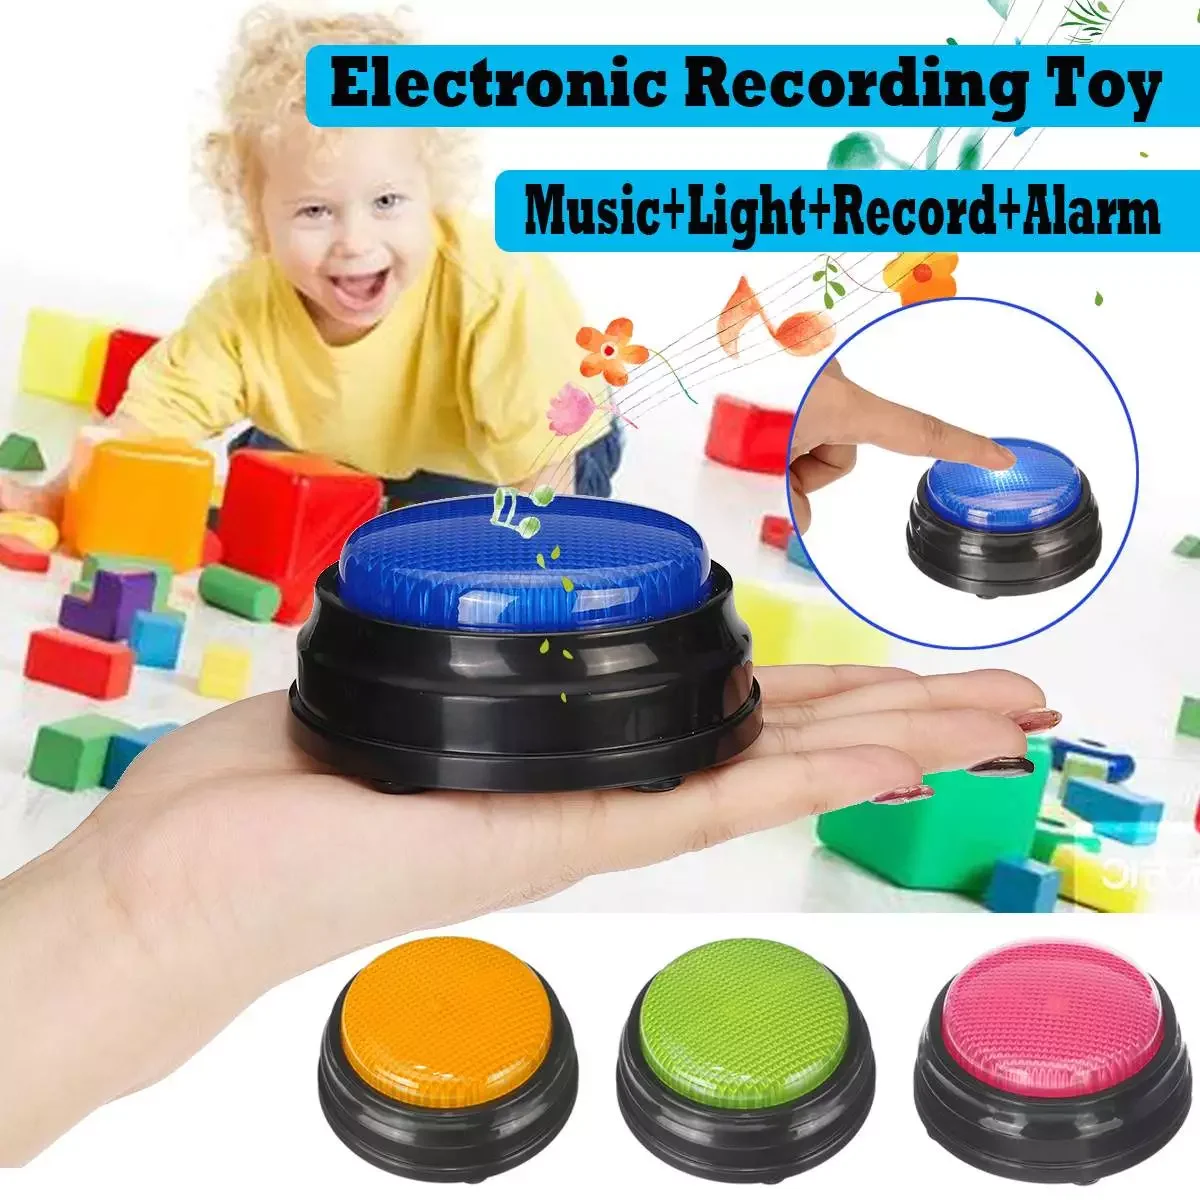 recording button buzzer sound button can record sound or music Kids Children Toy Gifts